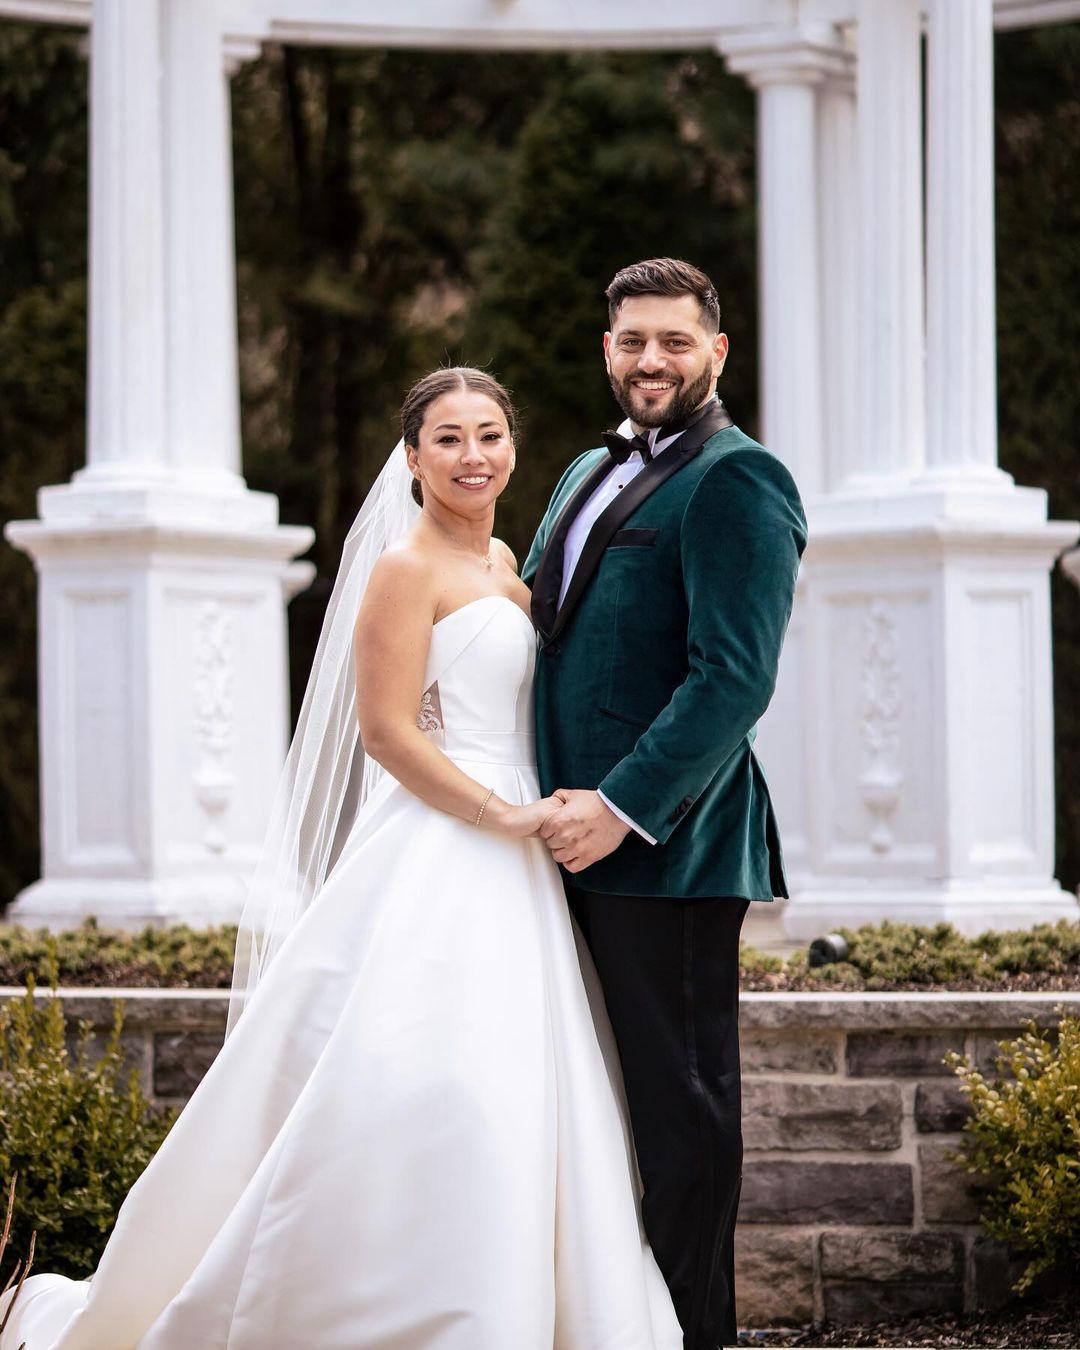 class="content__text"
 Who needs something blue when you have something green? The groom is reinventing black tie in our gorgeous Harford Velvet Emerald Green Suit. Congratulations to @ayse___rose + @photoshack 

📷: @morbyphotography 

 #Indochino #MadeForYou #IndochinoWedding #WeddingWednesdays 
 